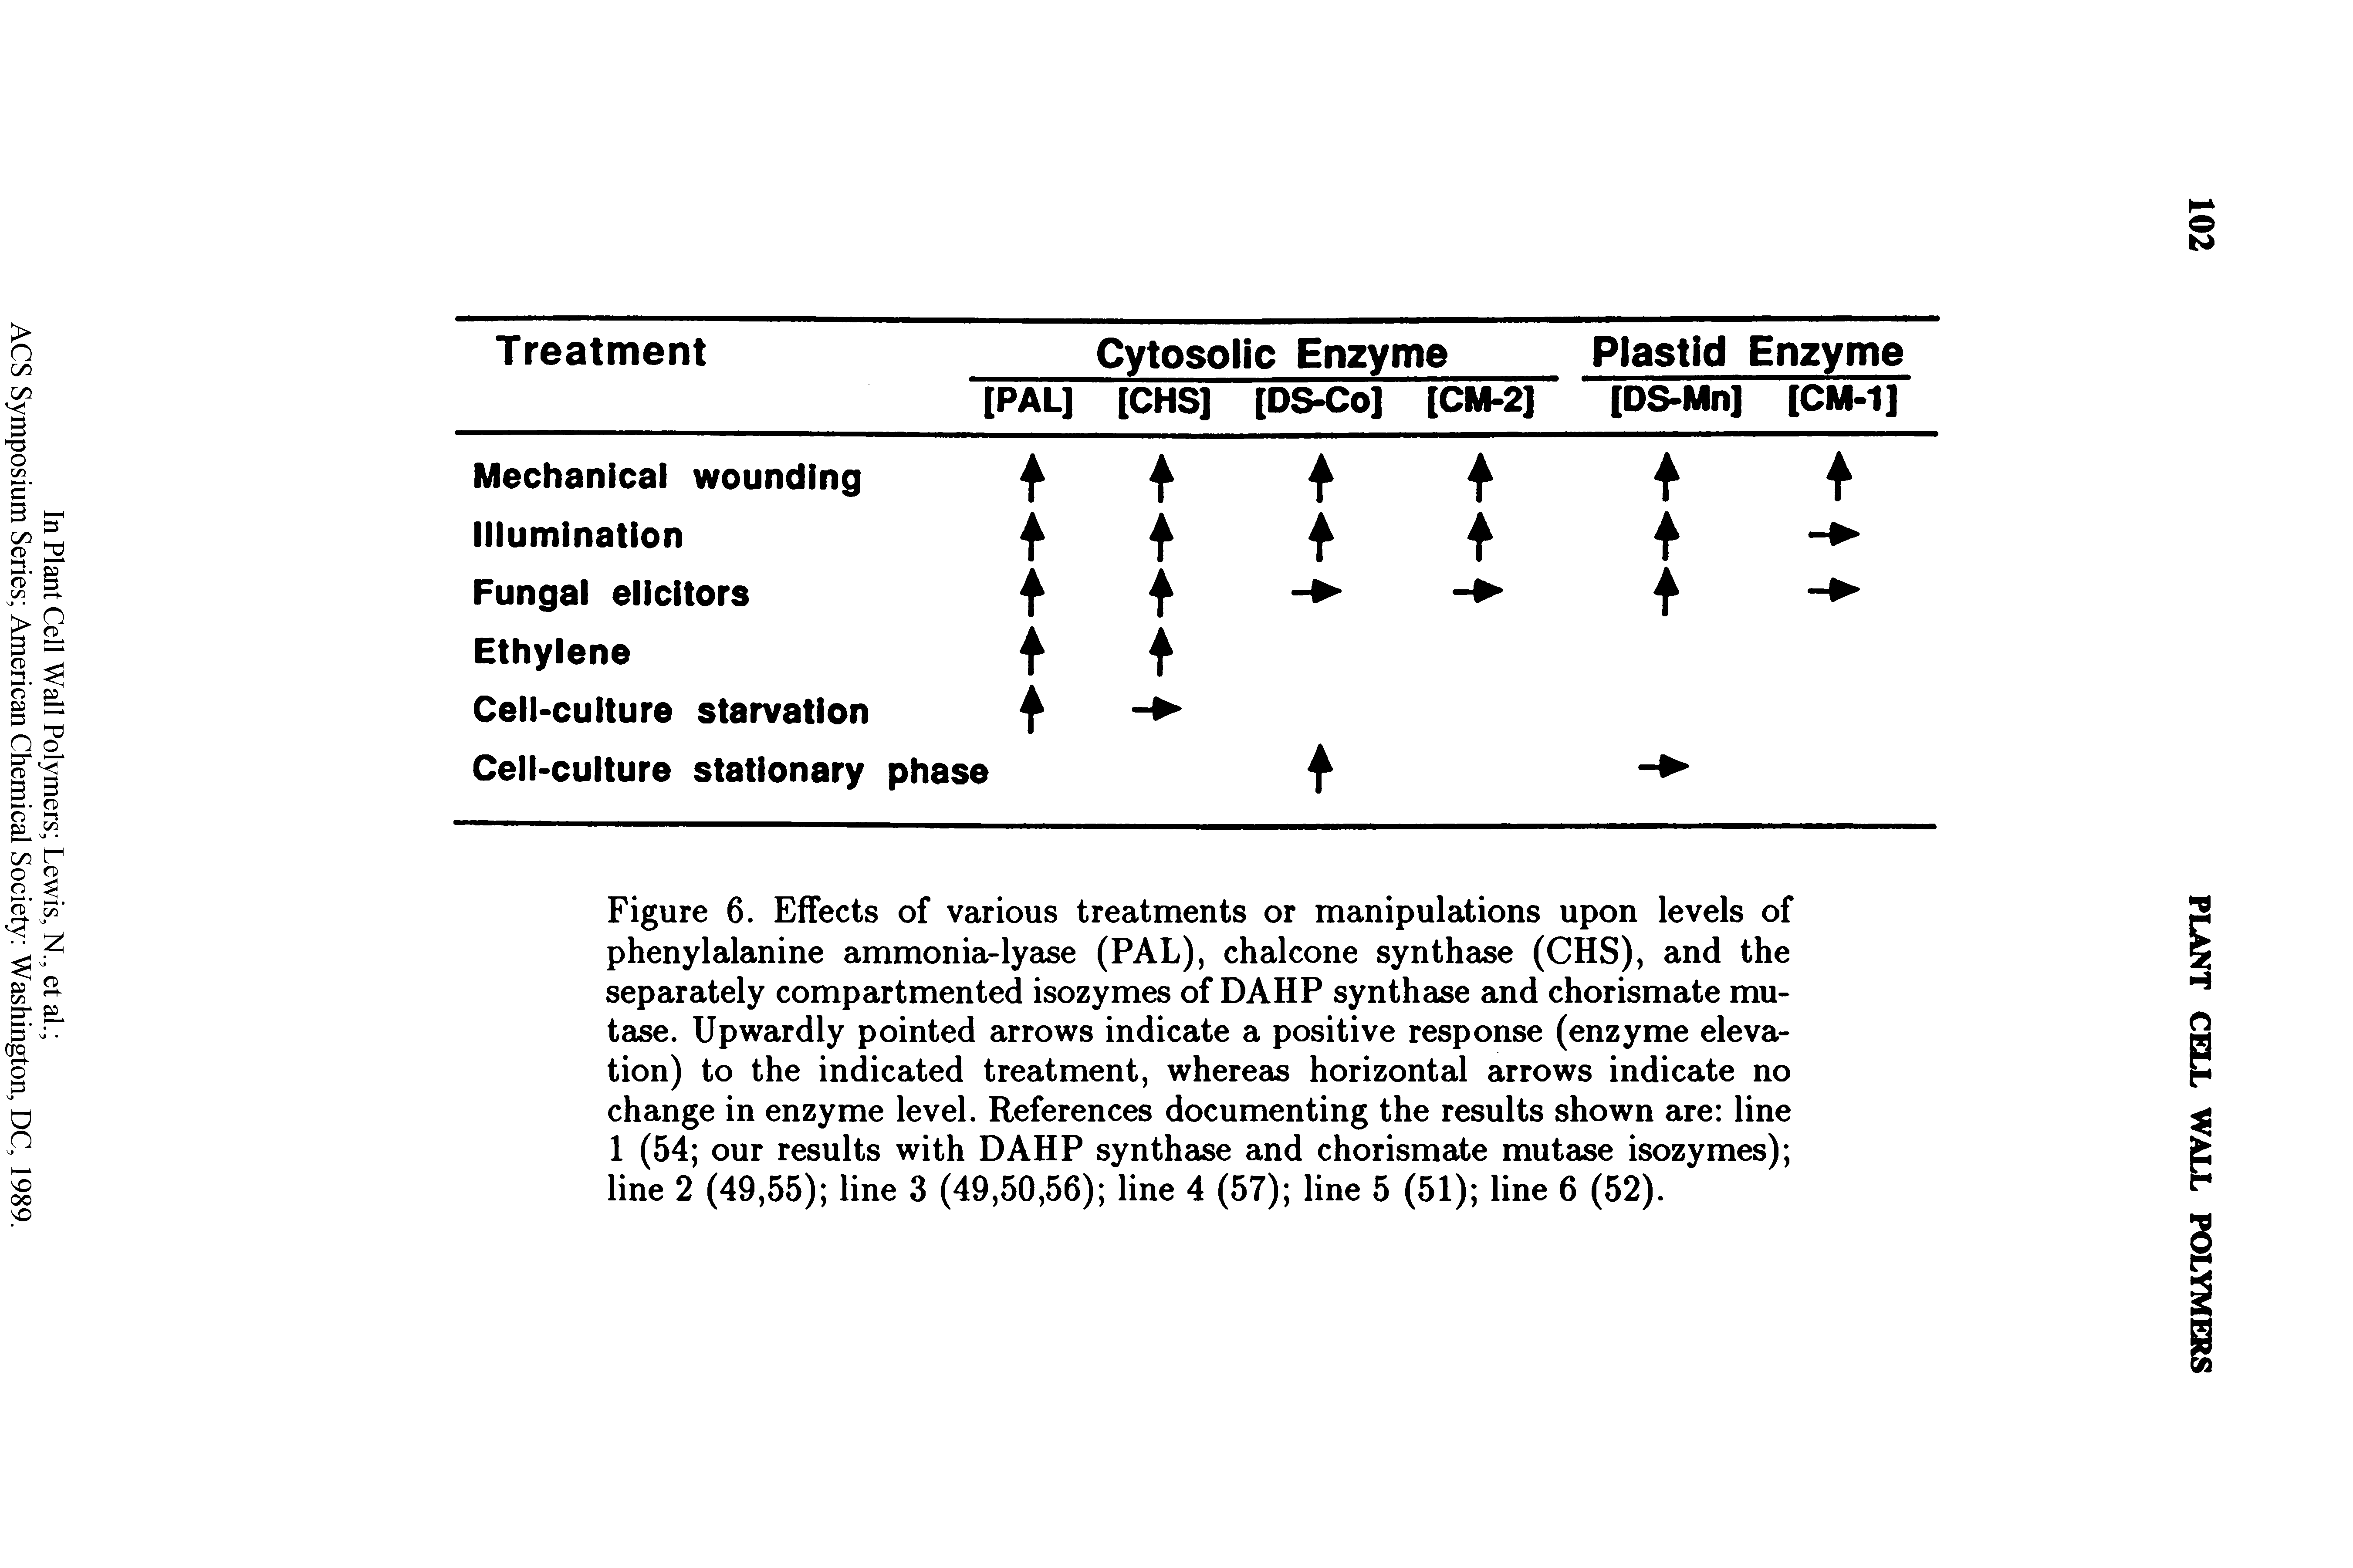 Figure 6. Effects of various treatments or manipulations upon levels of phenylalanine ammonia-lyase (PAL), chalcone synthase (CHS), and the separately compartmented isozymes of DAHP synthase and chorismate mu-tase. Upwardly pointed arrows indicate a positive response (enzyme elevation) to the indicated treatment, whereas horizontal arrows indicate no change in enzyme level. References documenting the results shown are line 1 (54 our results with DAHP synthase and chorismate mutase isozymes) line 2 (49,55) line 3 (49,50,56) line 4 (57) line 5 (51) line 6 (52).